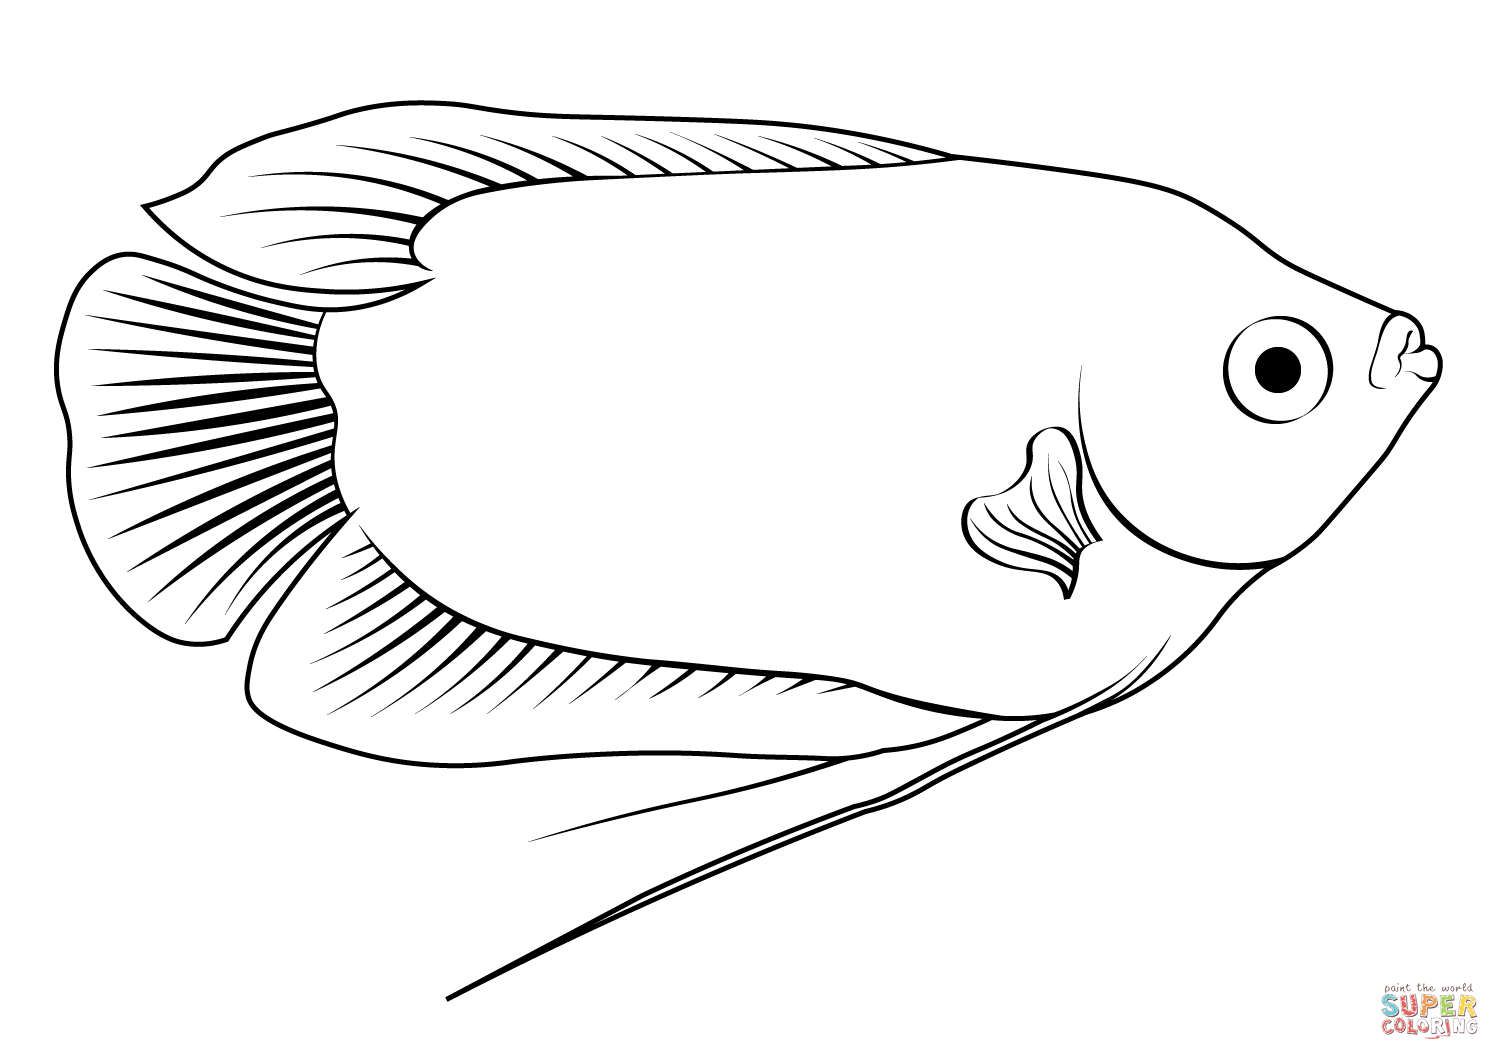 Dwarf gourami trichogaster lalius coloring page free printable coloring pages